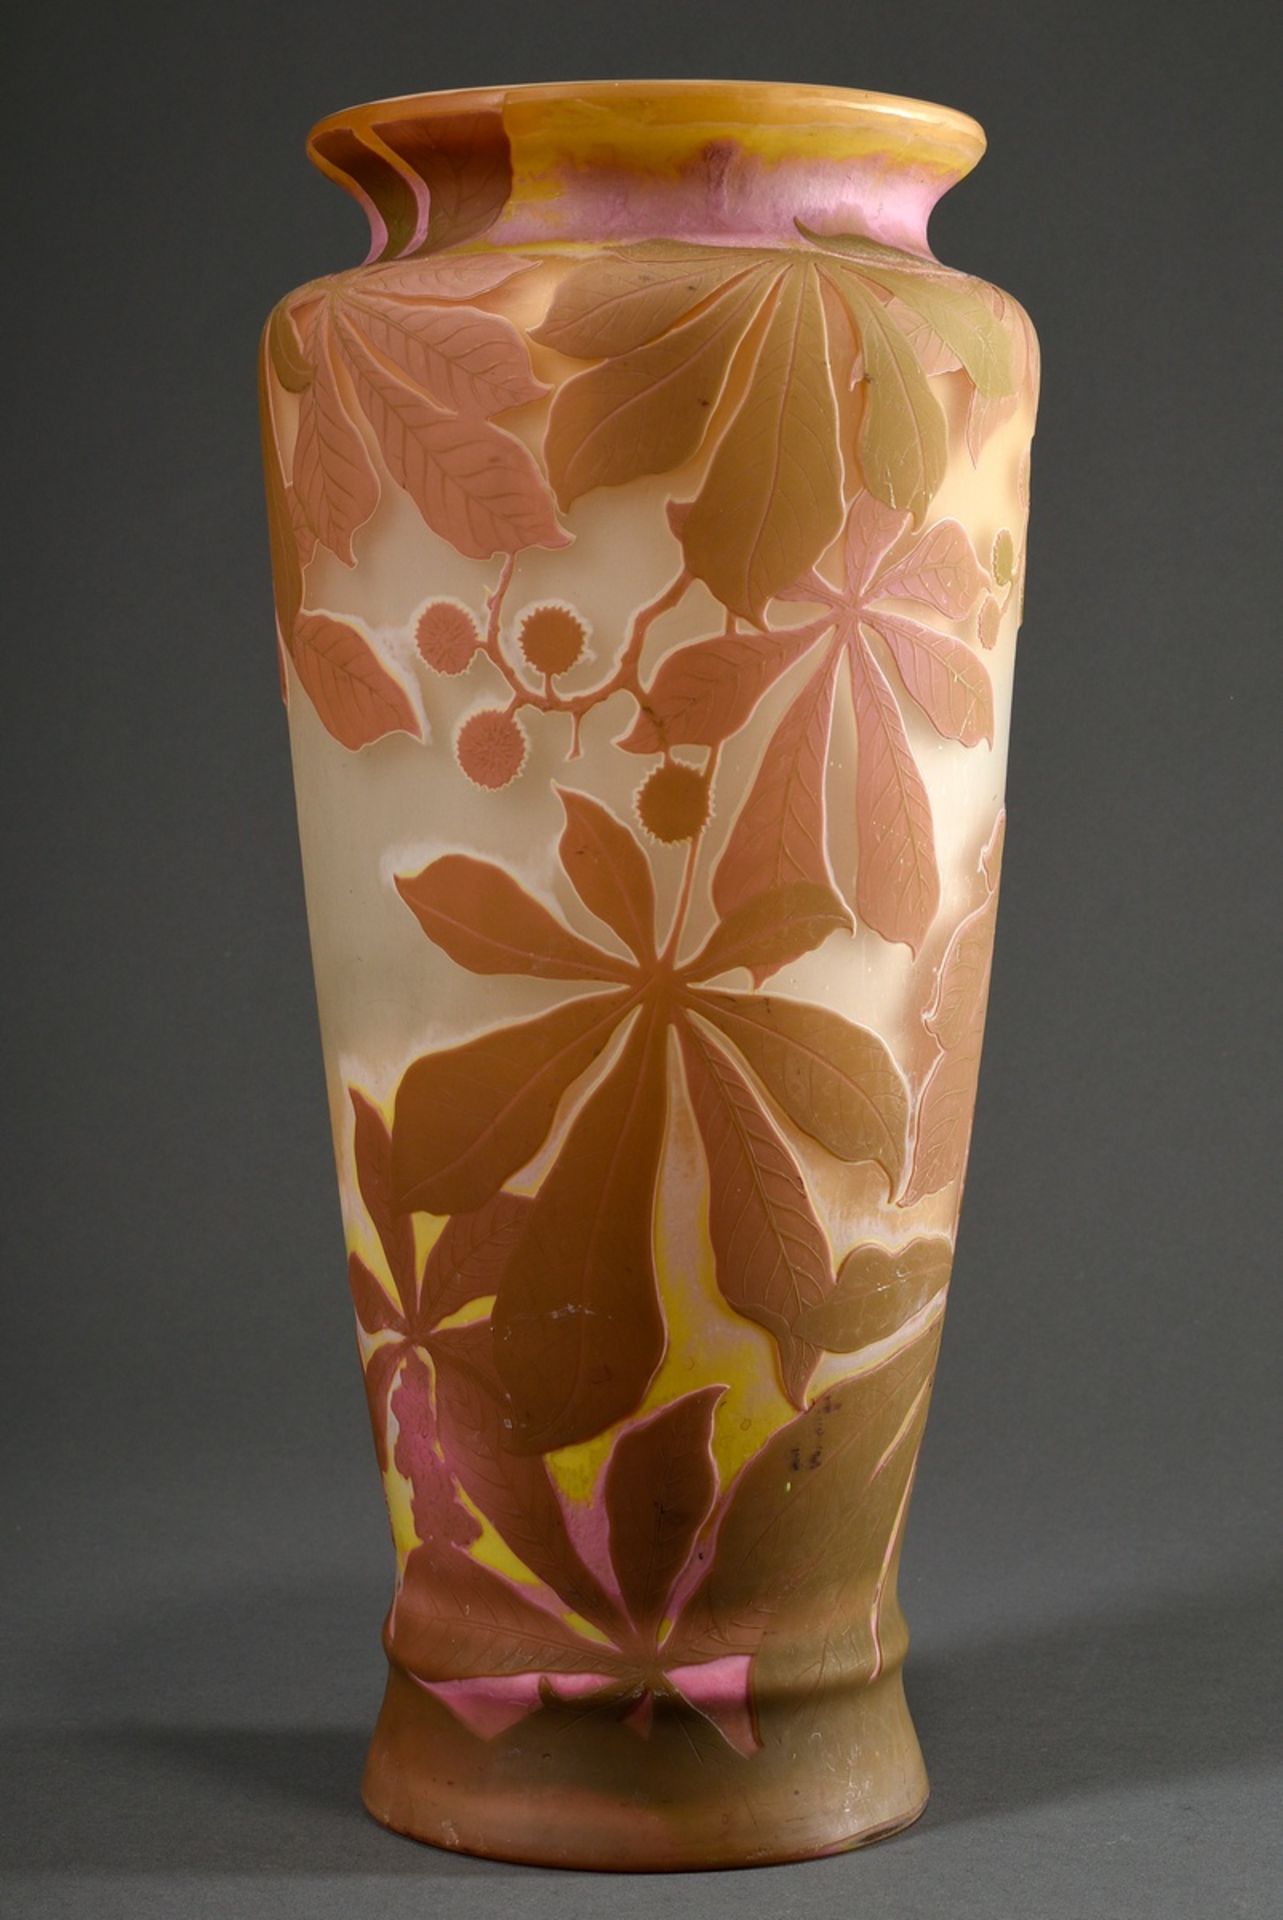 Very large Art Nouveau Gallé vase in conical baluster shape with rosé-light brown overlay and "ches